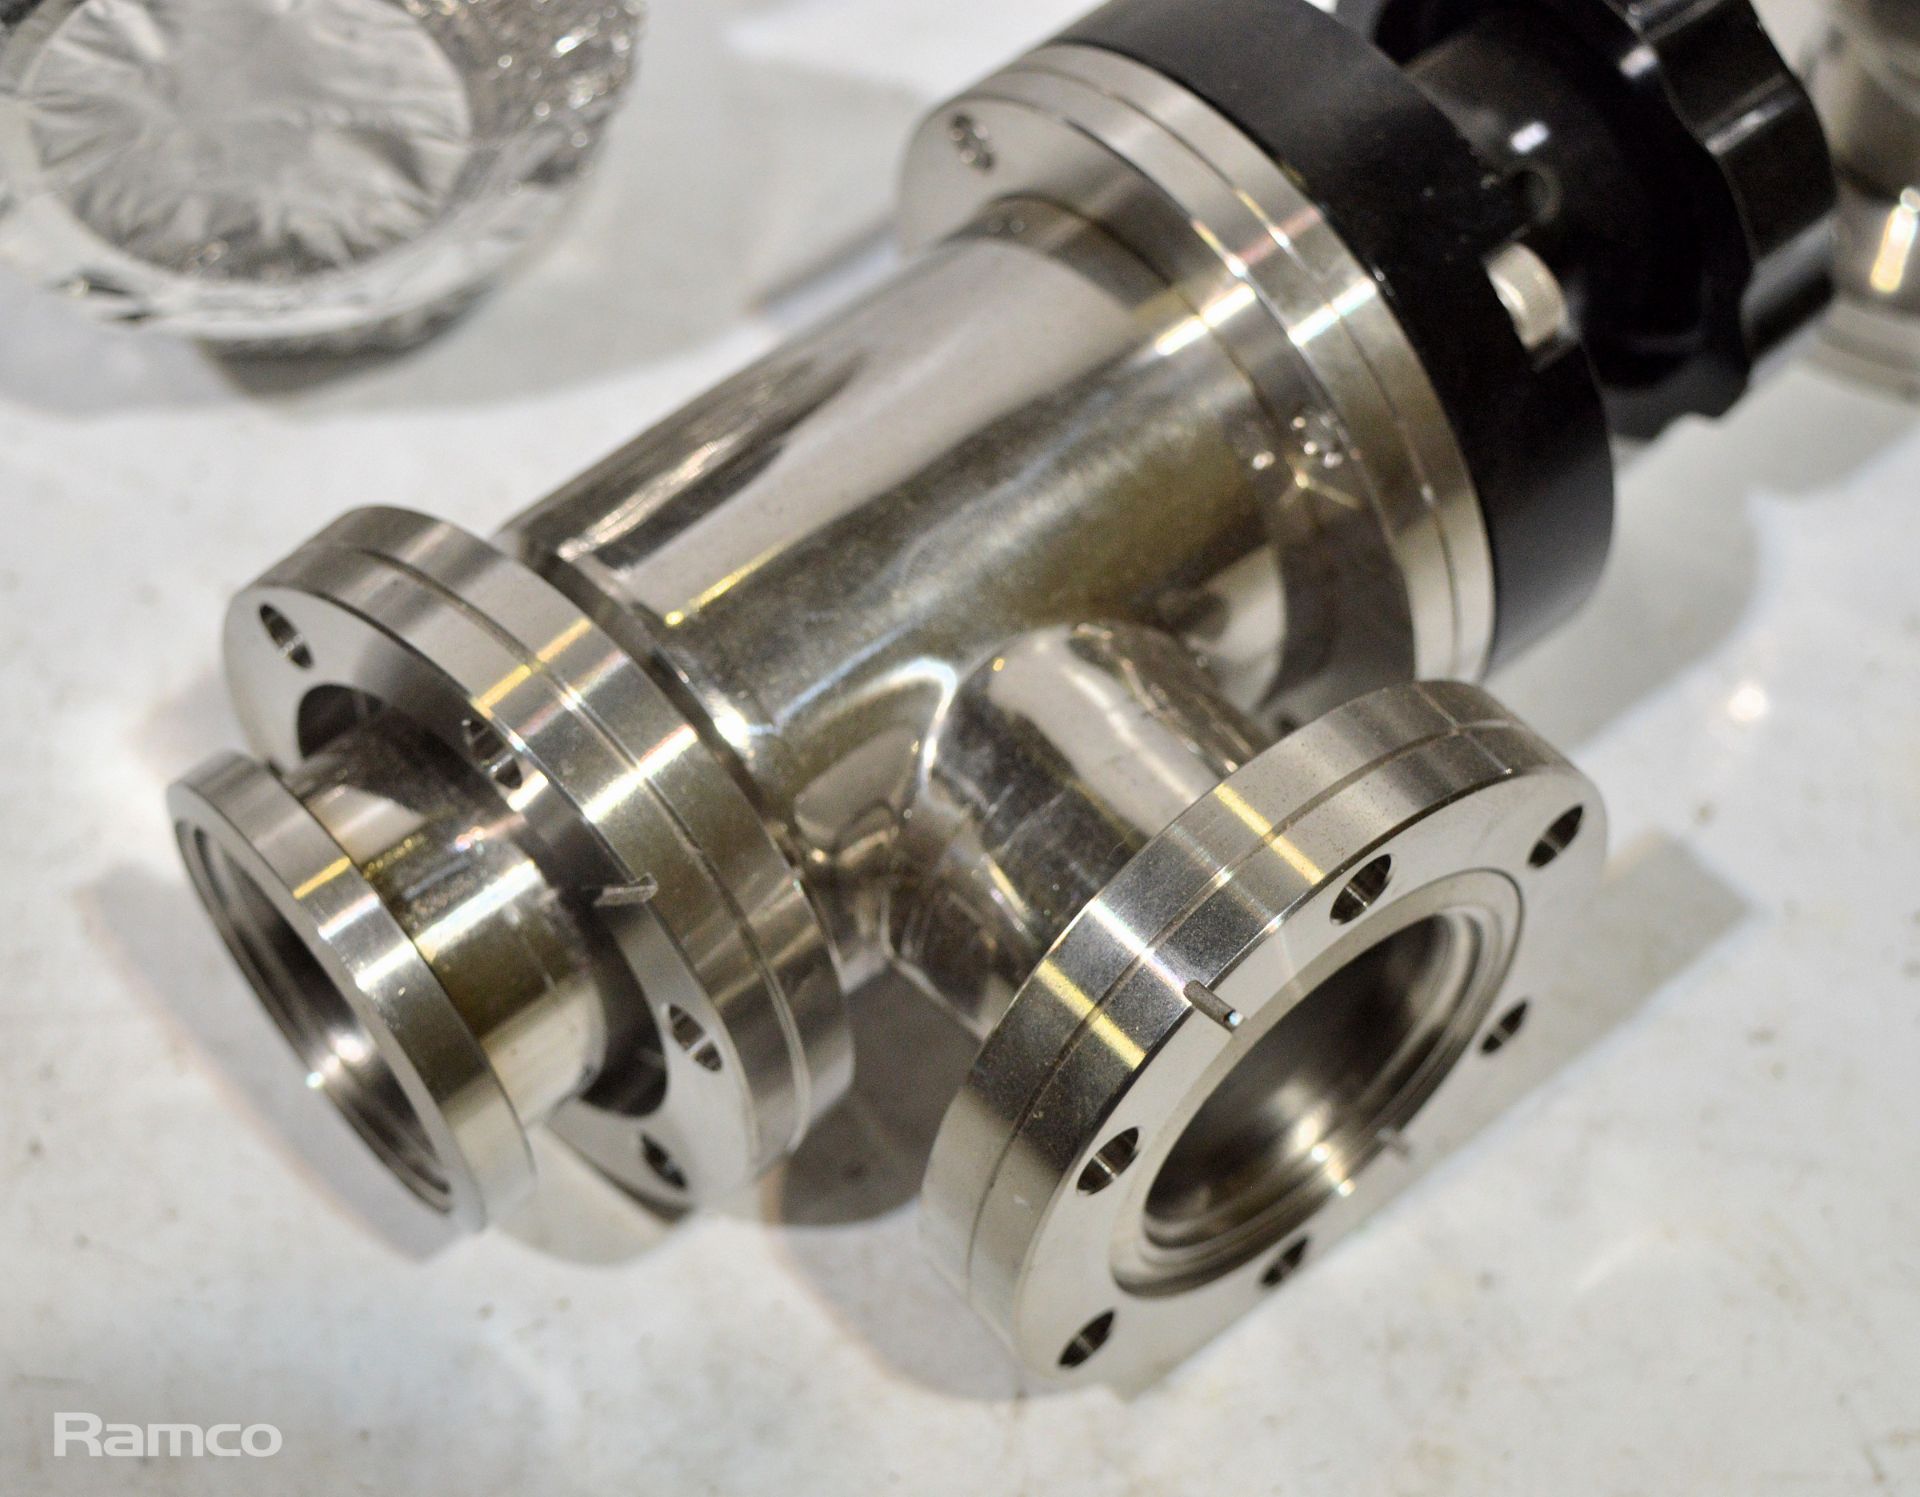 4x Scanwell Conflat Bellows Vacuum Valves - Image 4 of 5